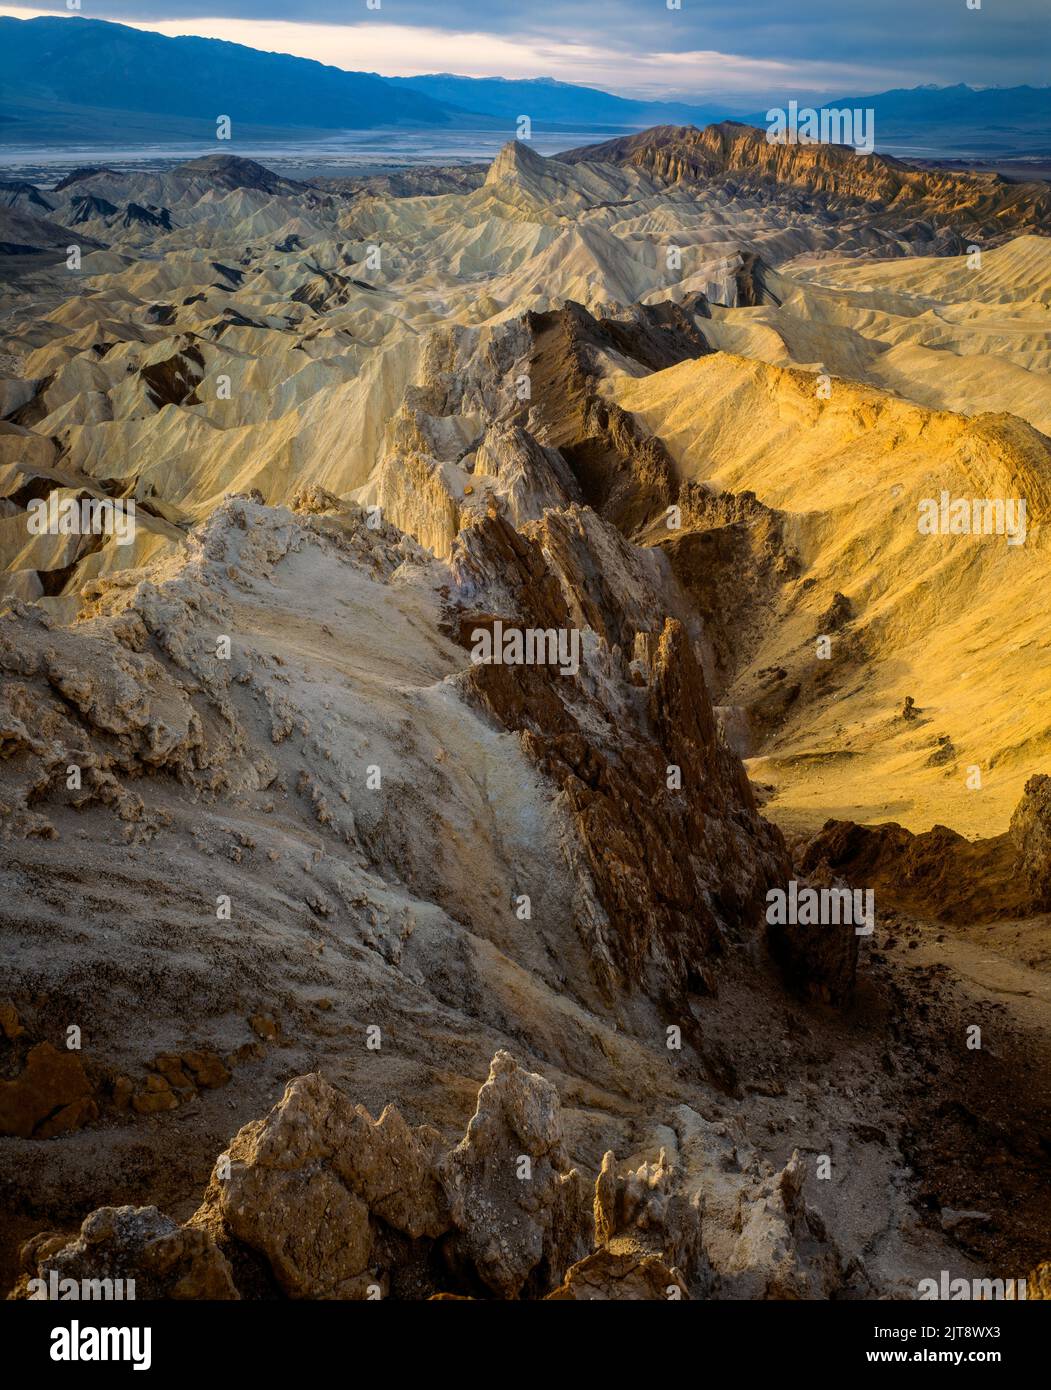 Dusk, Manly Peak, Golden Canyon, Death Valley National Park, California Stock Photo